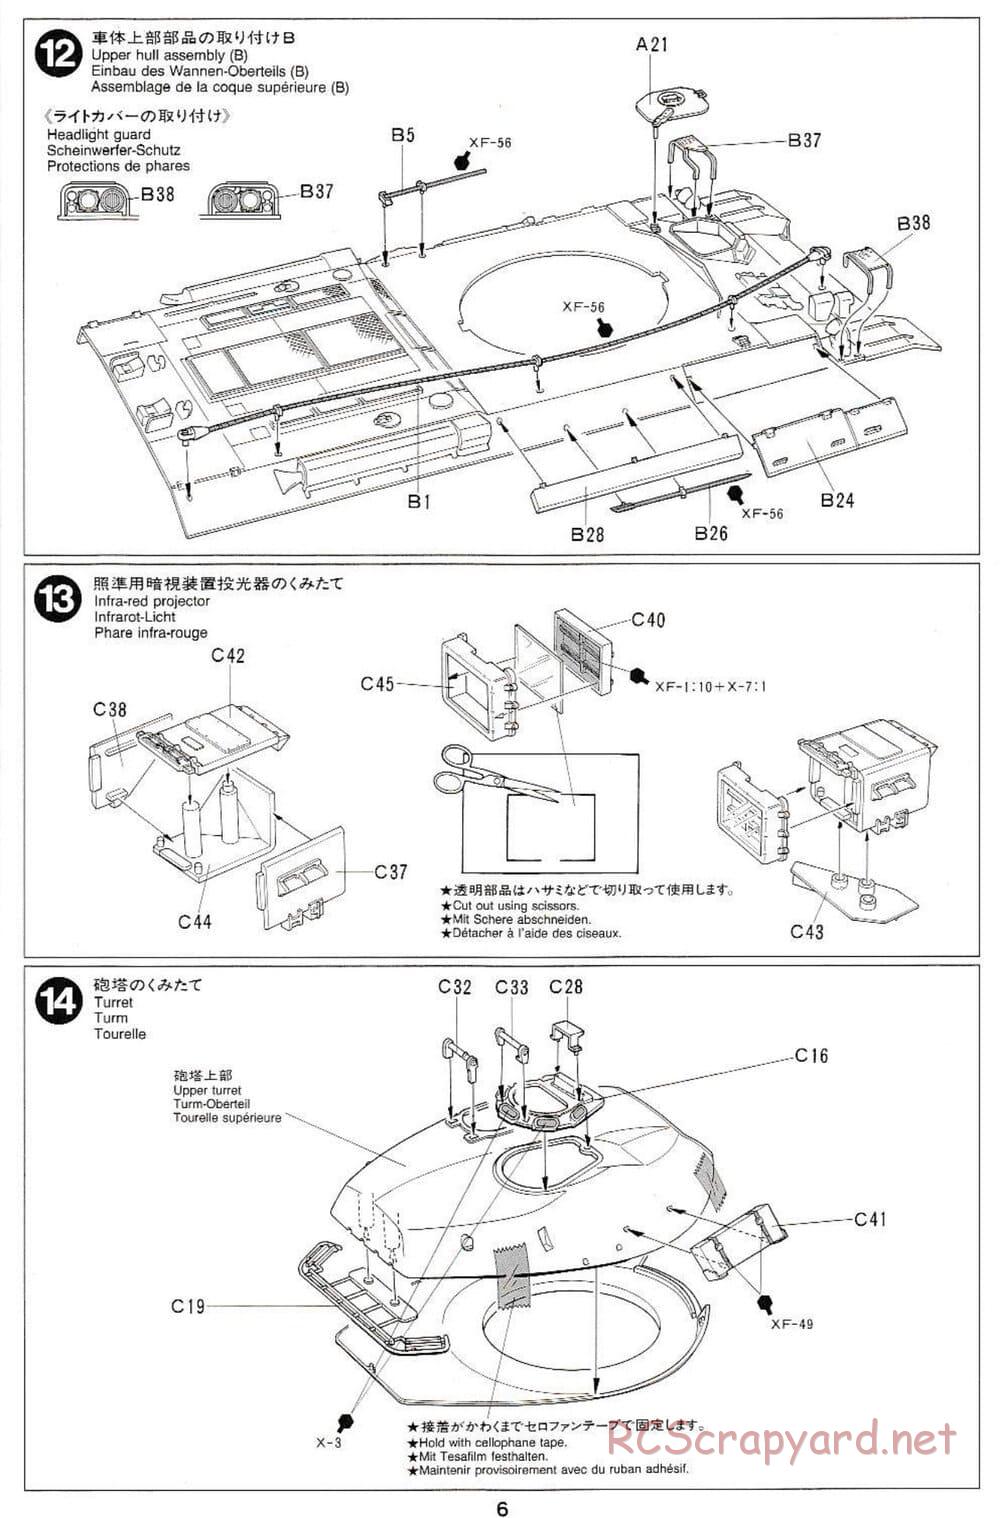 Tamiya - J.G.S.D.F. Type 74 - 1/35 Scale Chassis - Manual - Page 6